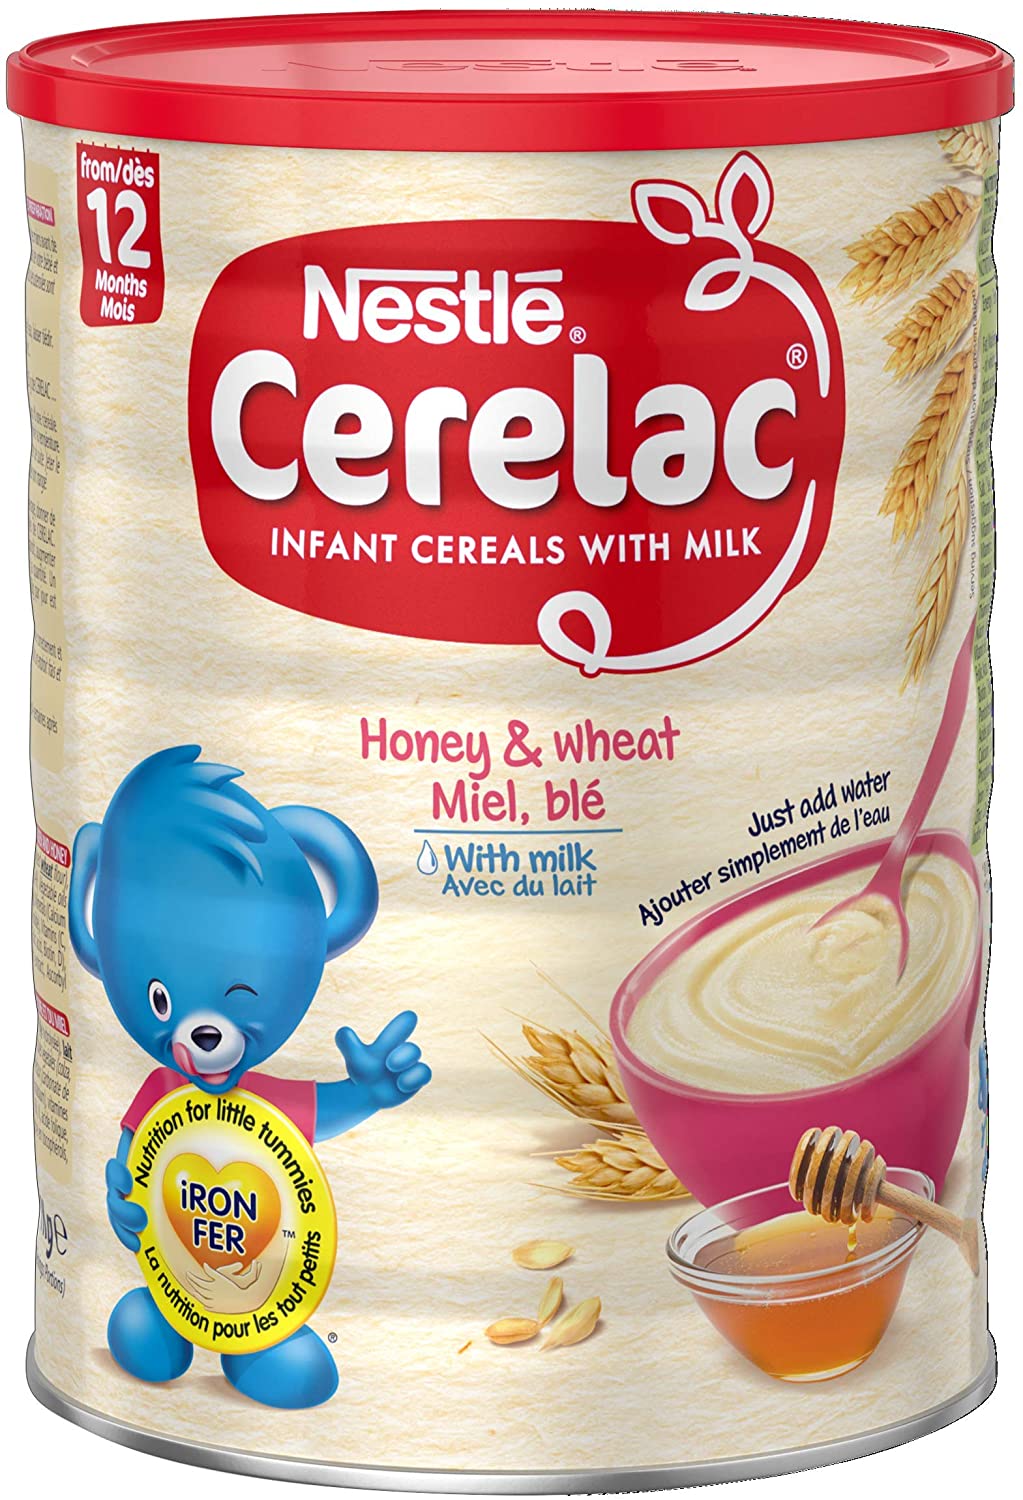 Nestle Cerelac Wheat and Honey with Milk Infant Cereal 400g, 12 months+